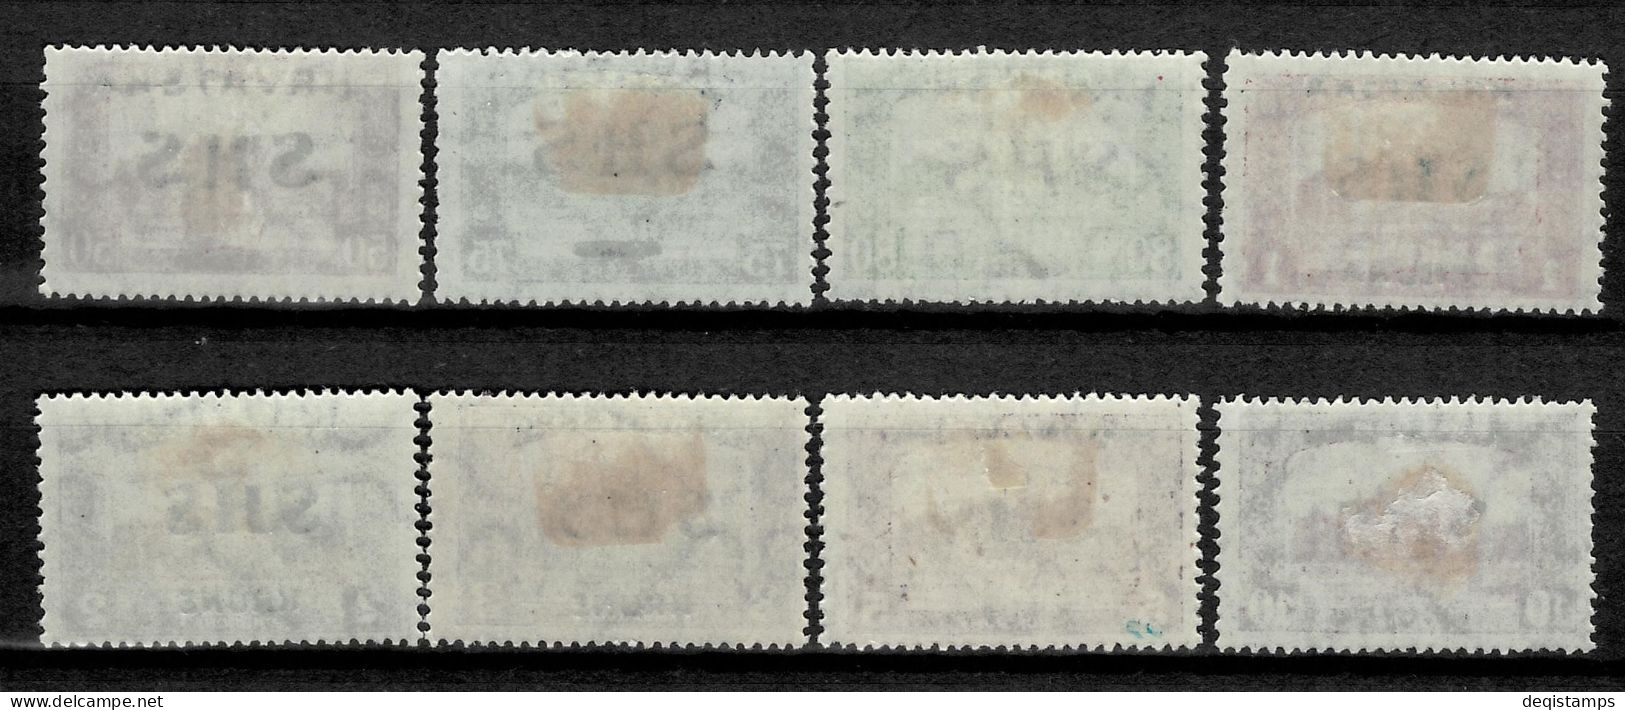 SHS - Croatia Stamps 1918 Parliament Set Hungary Postage MH Stamps Overprinted - Unused Stamps